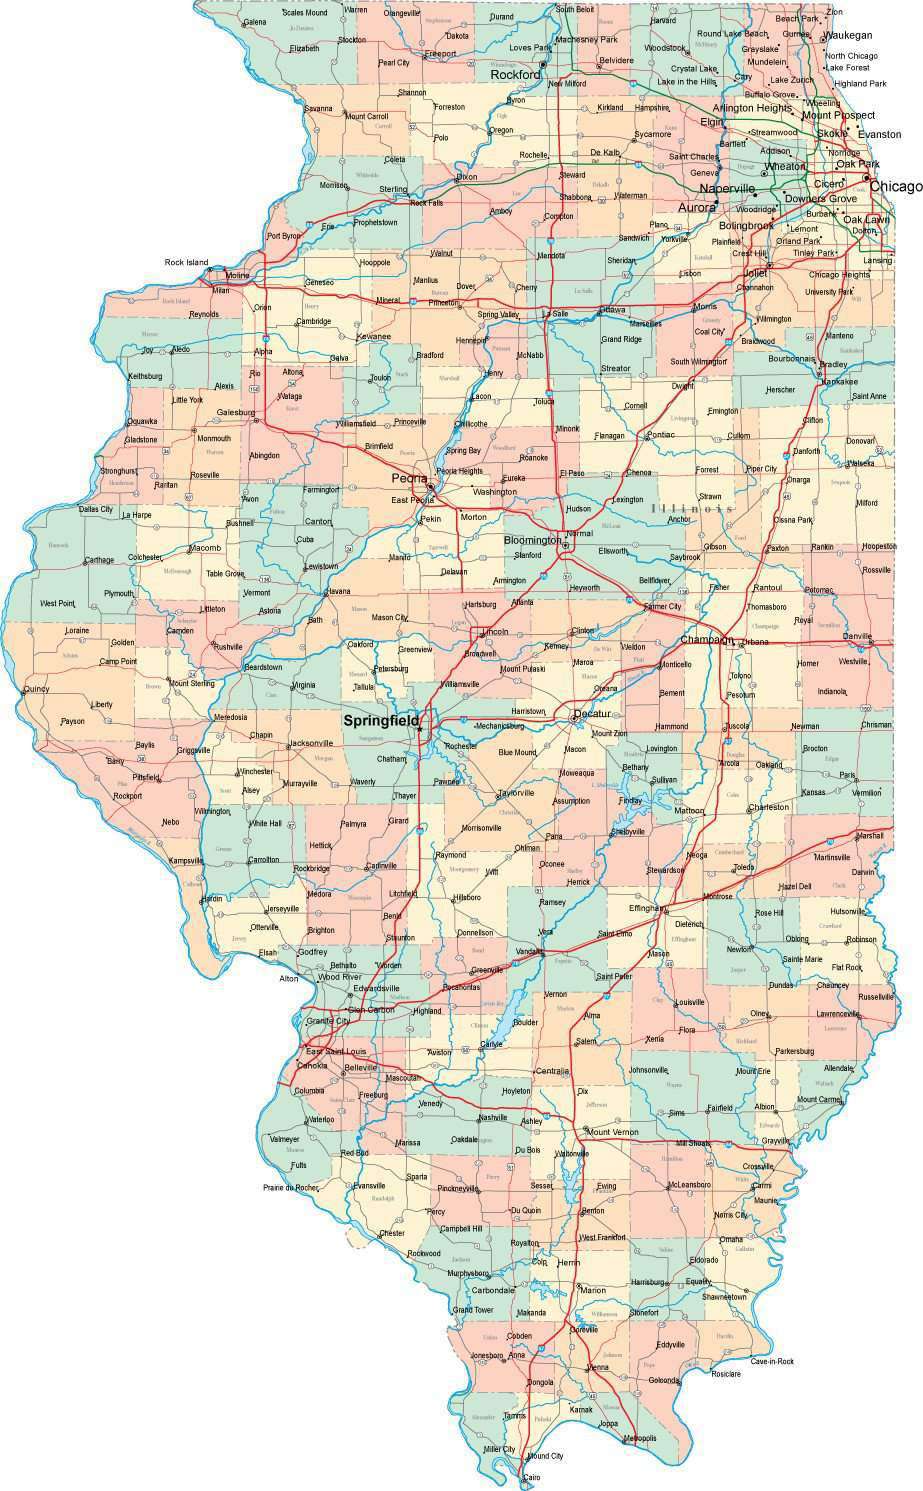 Digital Illinois State Map In Multi Color Fit Together Style To Match Other States Map Resources 4820